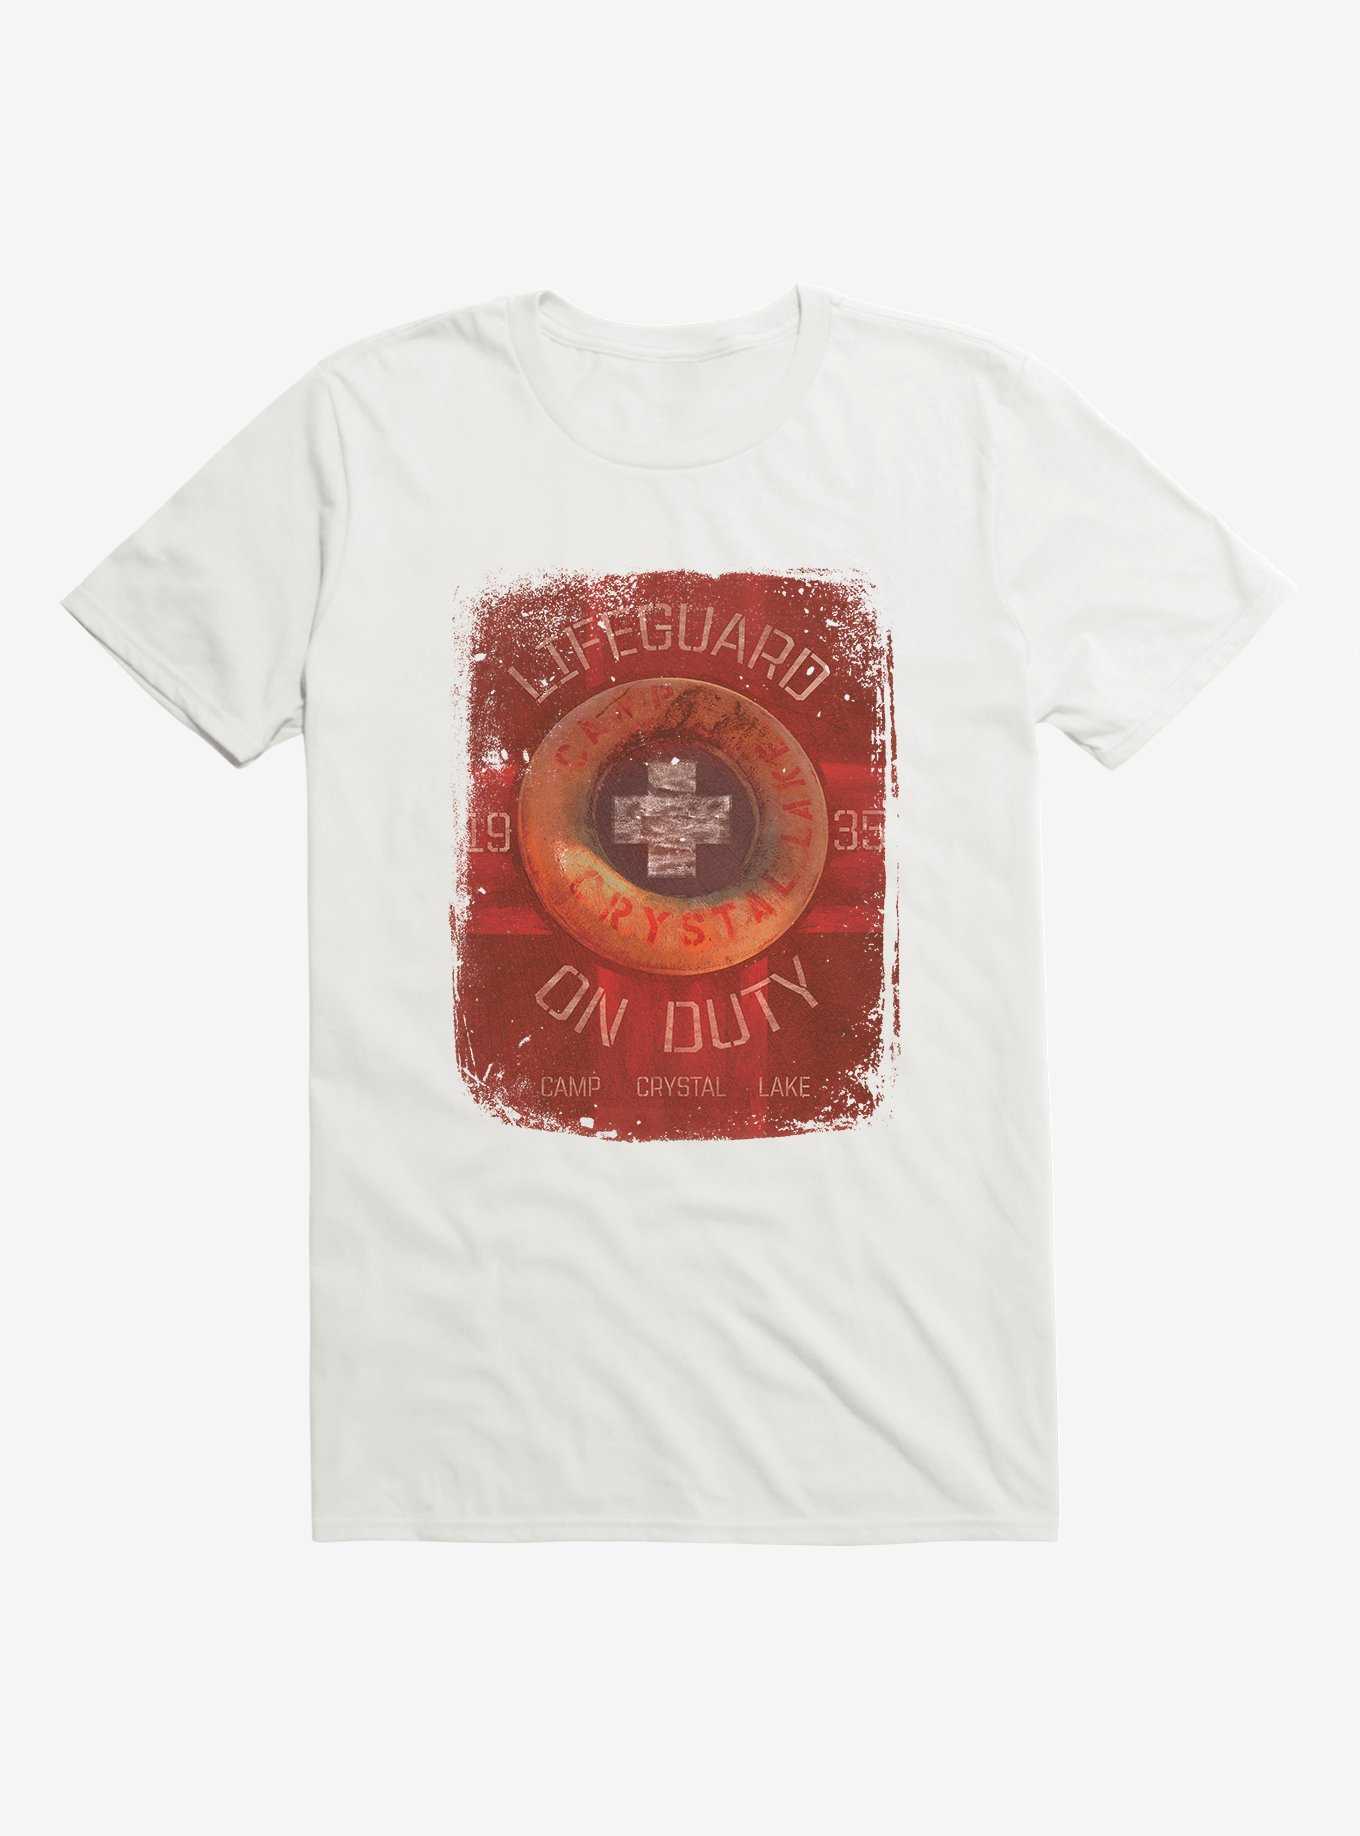 Friday The 13th Lifeguard On Duty T-Shirt, , hi-res